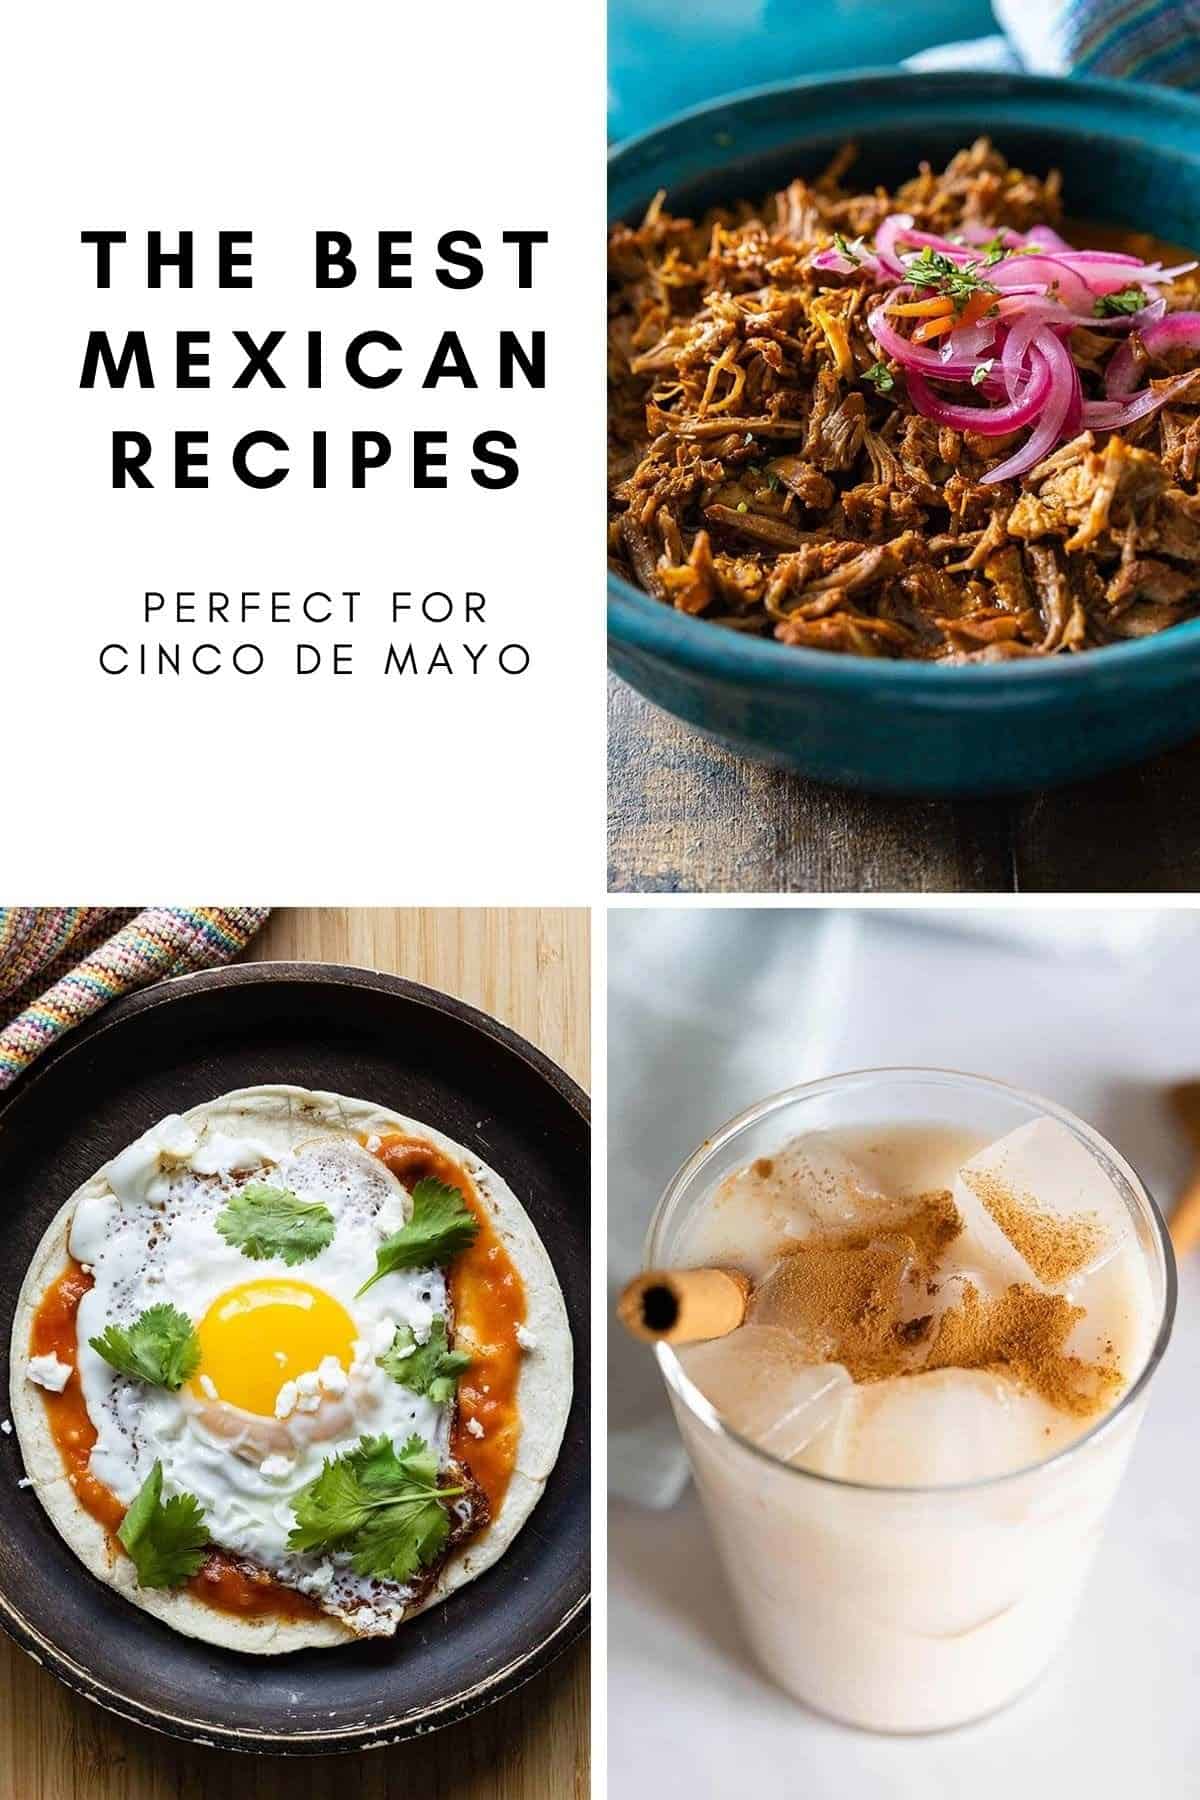 photo collage of 3 Mexican dishes and text overlay reading: The Best Mexican Recipes.